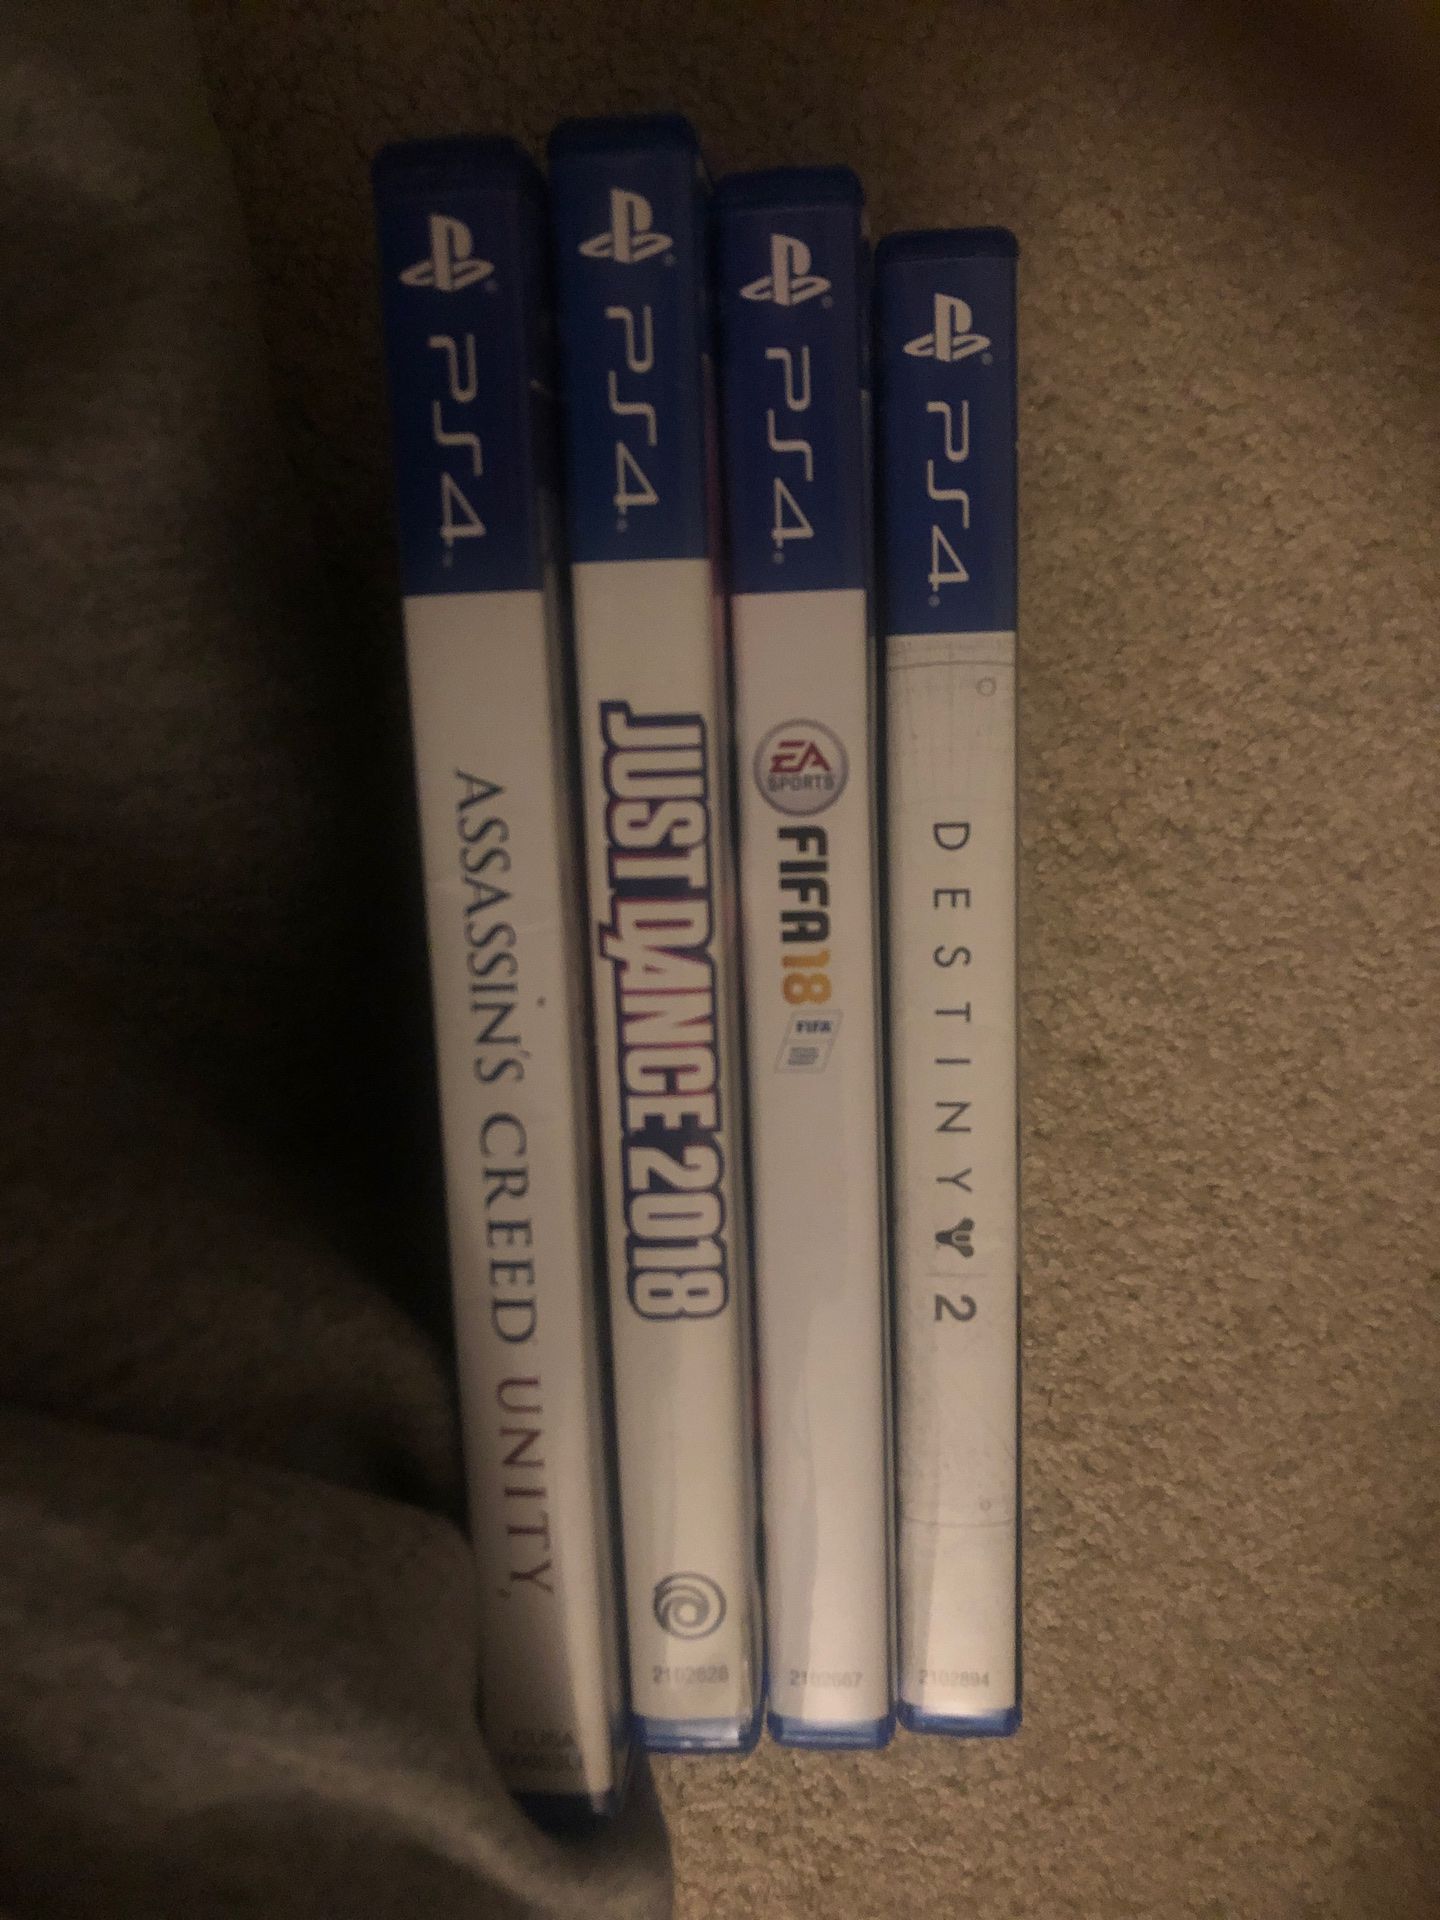 Ps4 games (Minecraft included)